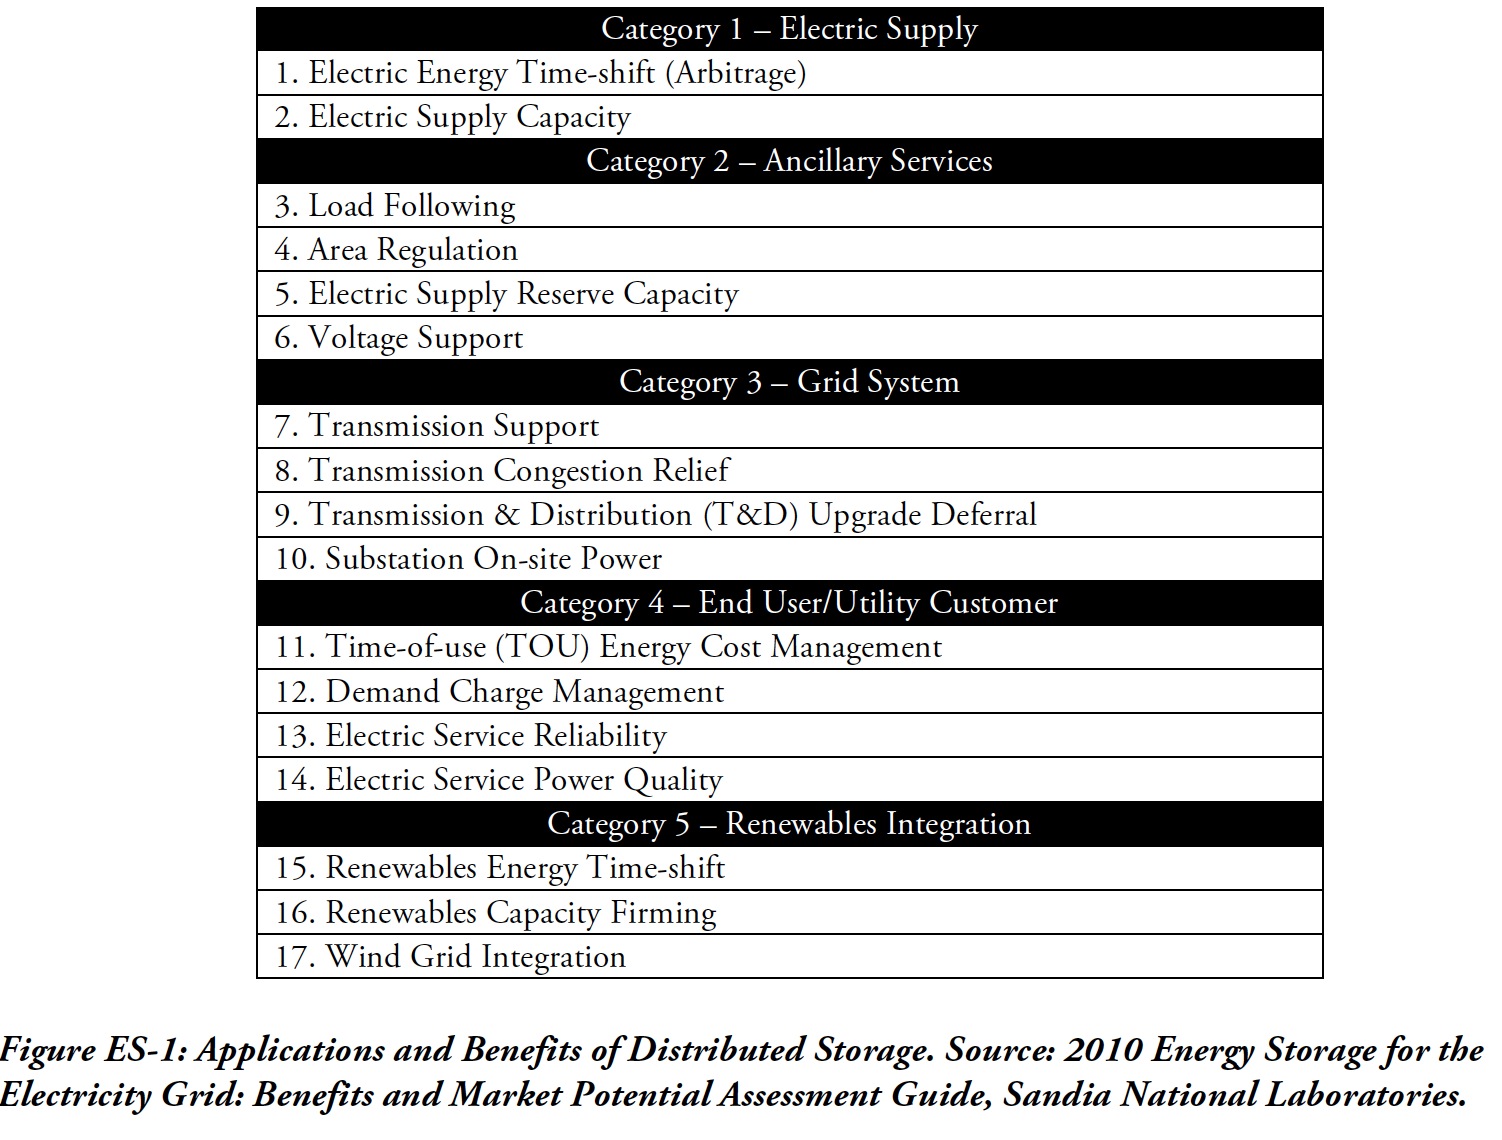 Figure ES-1: Applications and Benefits of Distributed Storage. Source: 2010 Energy Storage for the Electricity Grid: Benefits and Market Potential Assessment Guide, Sandia National Laboratories.